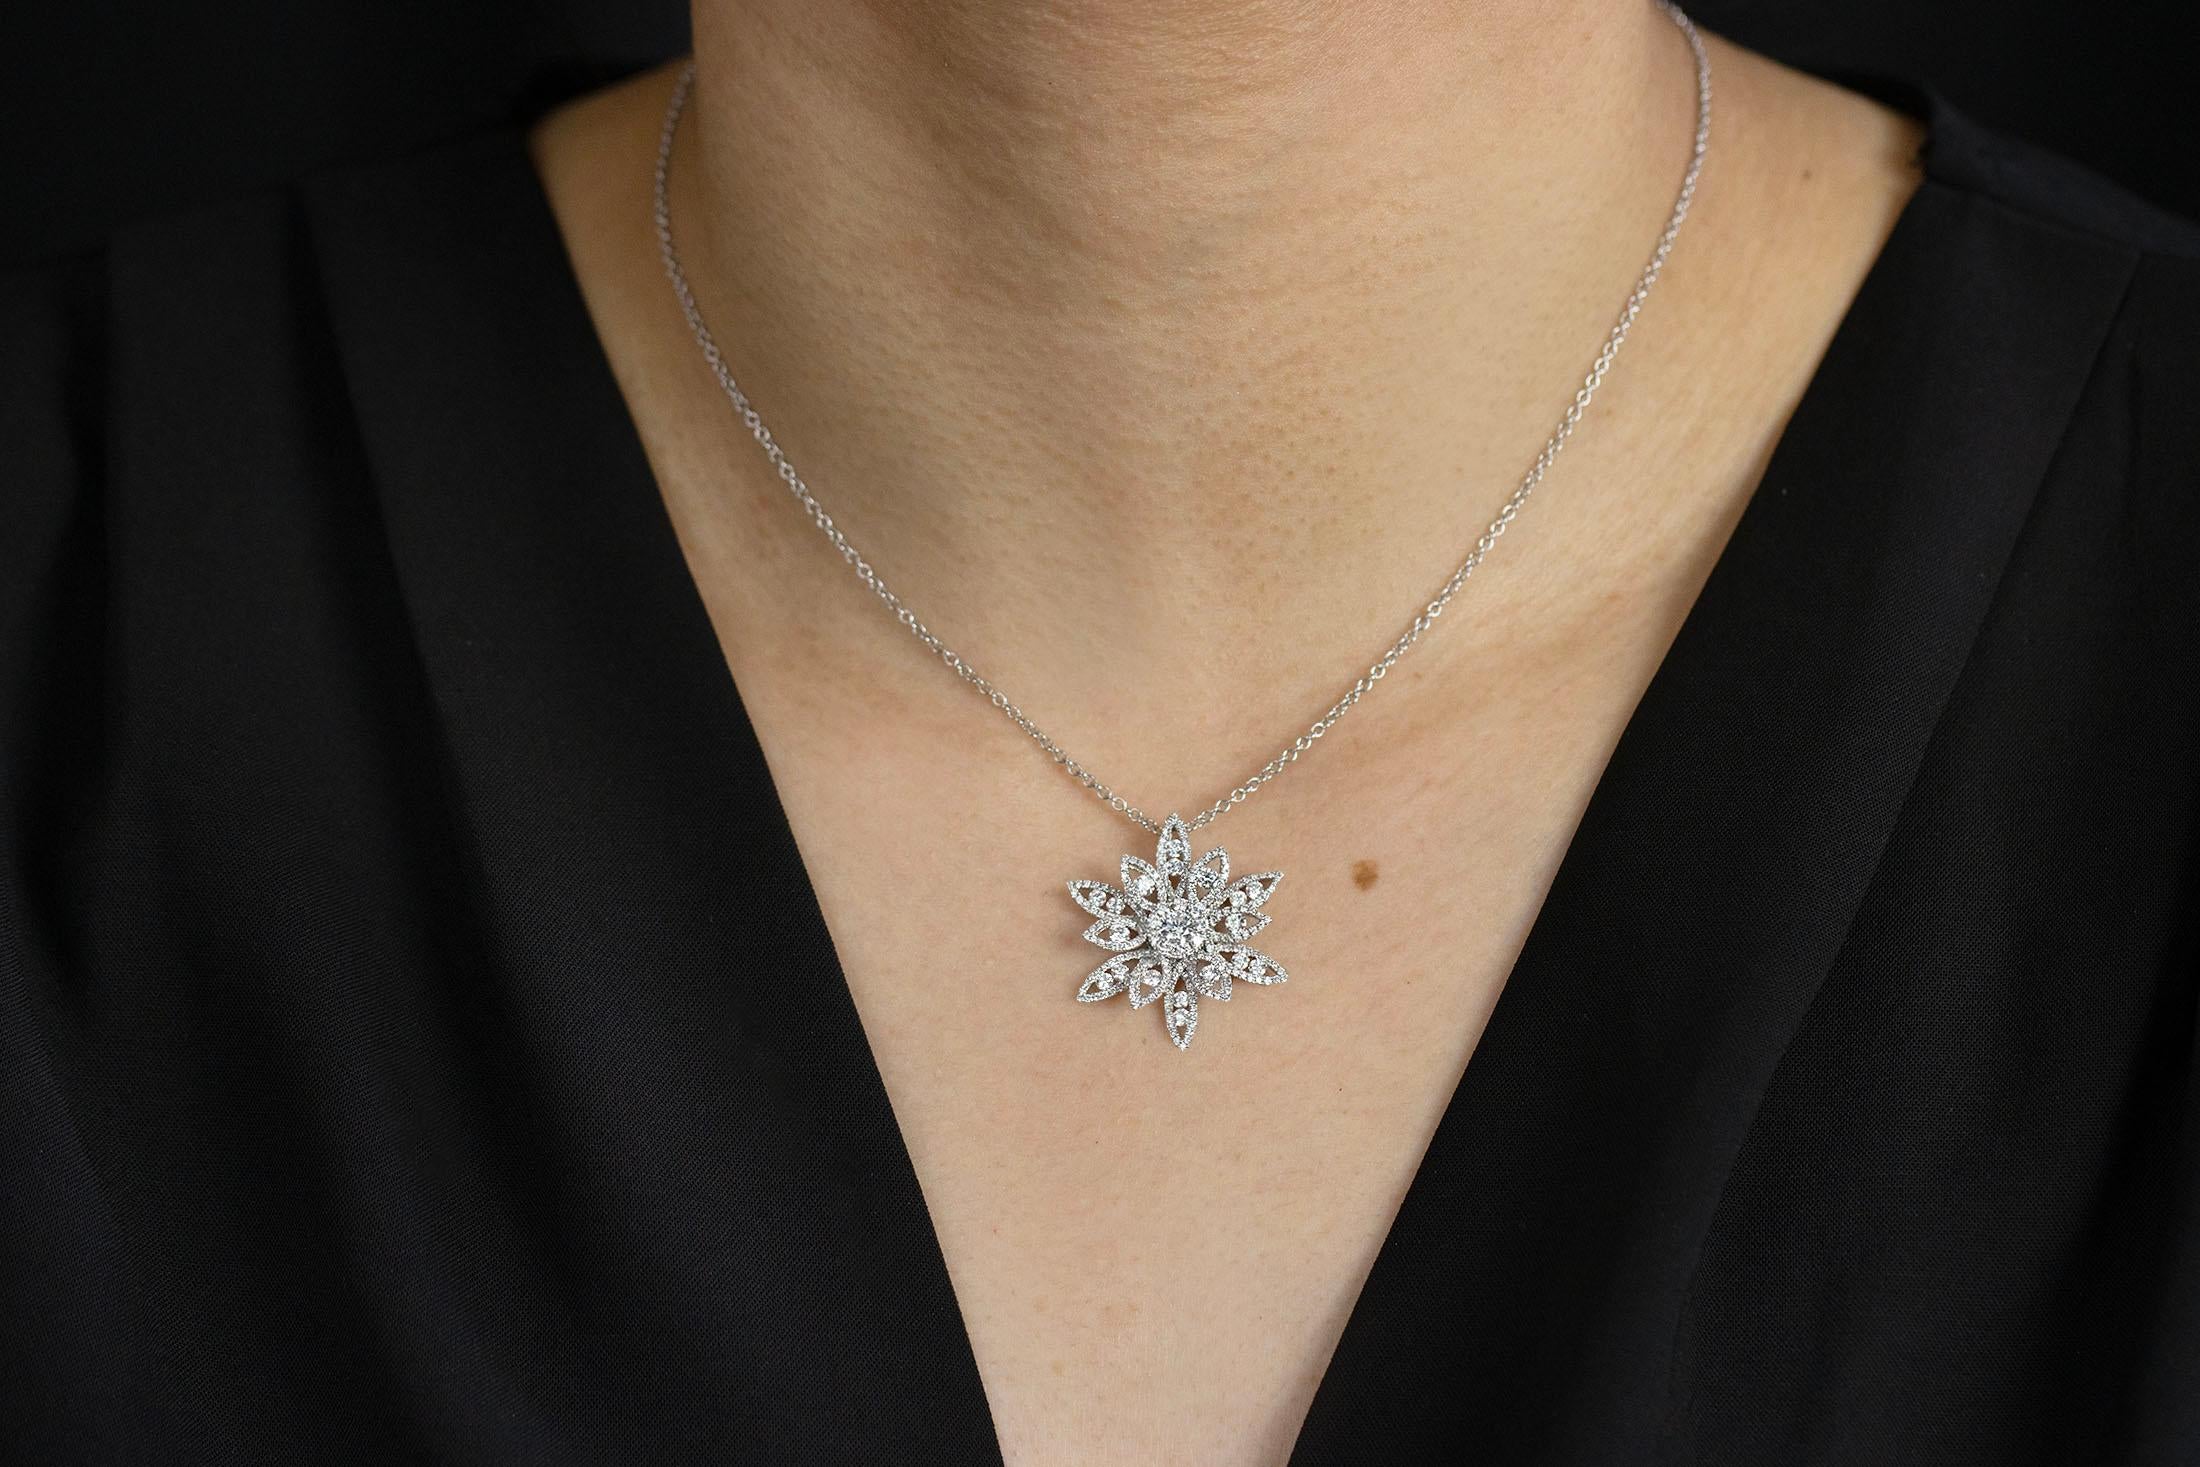 A brilliant pendant necklace showcasing a 0.19 carats diamond center stone surrounded by flower petals overlaid with sparkling melee diamonds. Accent diamonds weigh 1.39 carats total. Set in 18K white gold. Suspended on an 18 inch adjustable white